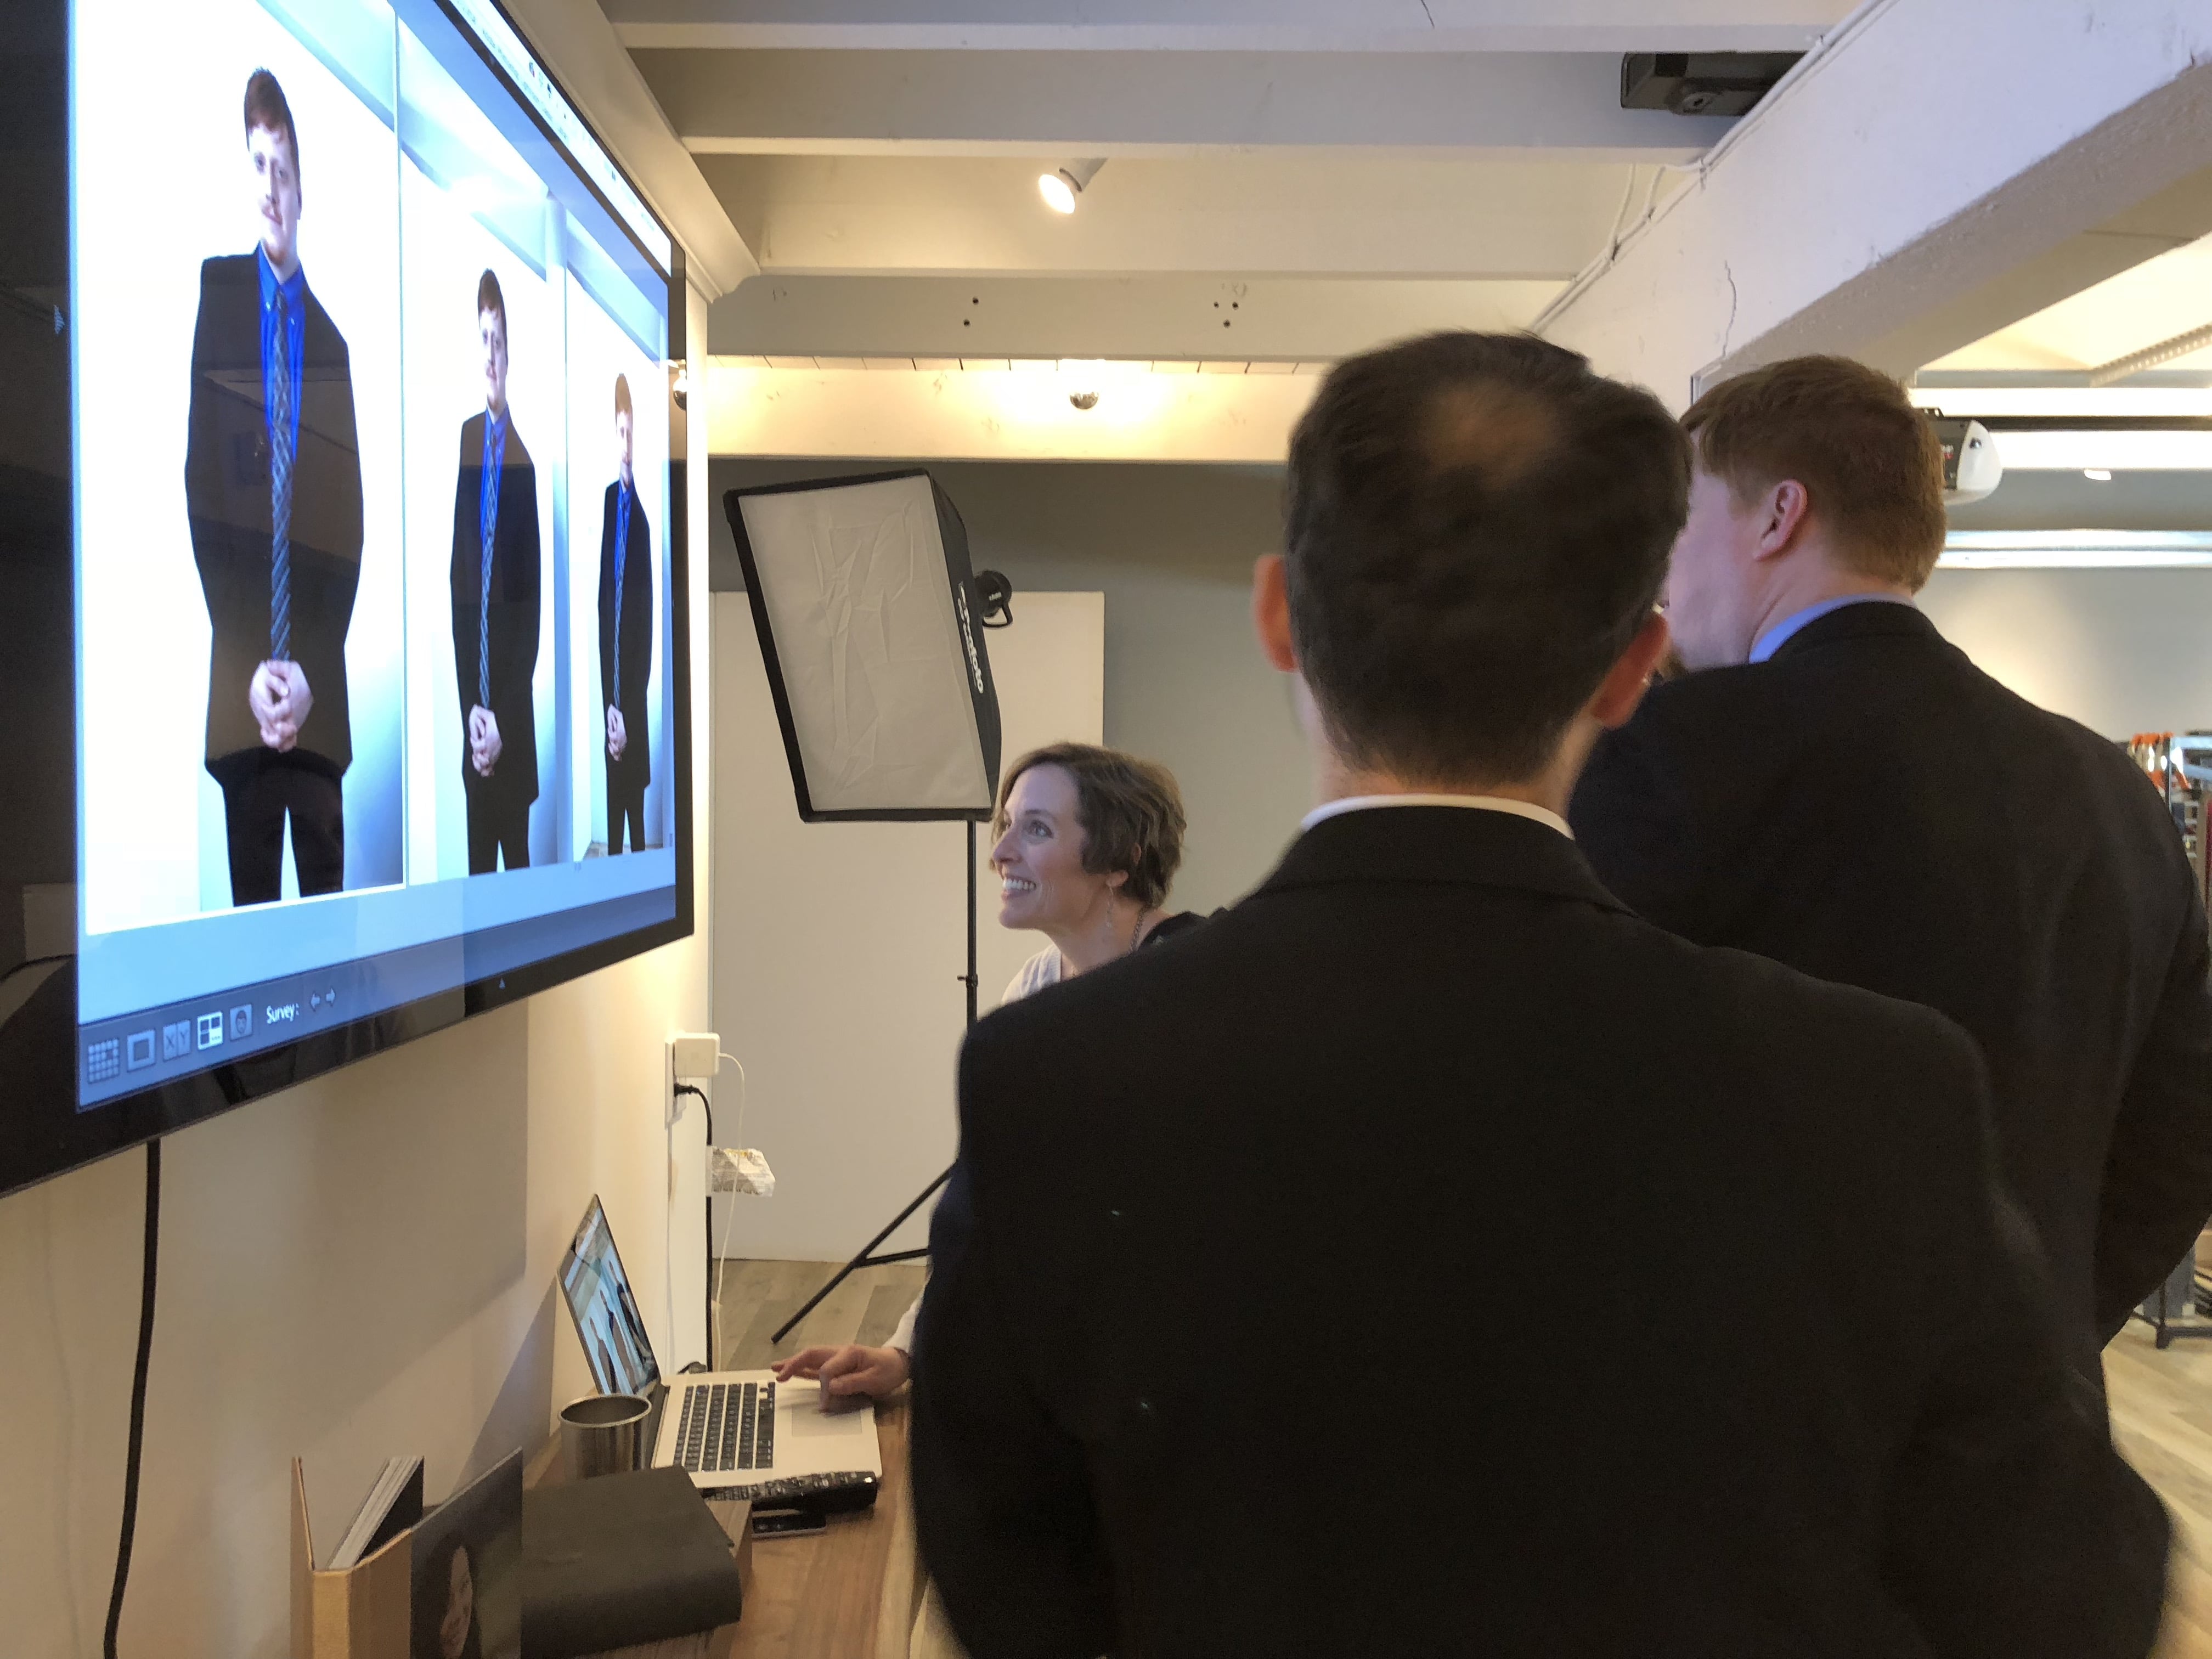 Group of people looking at pictures on a big screen